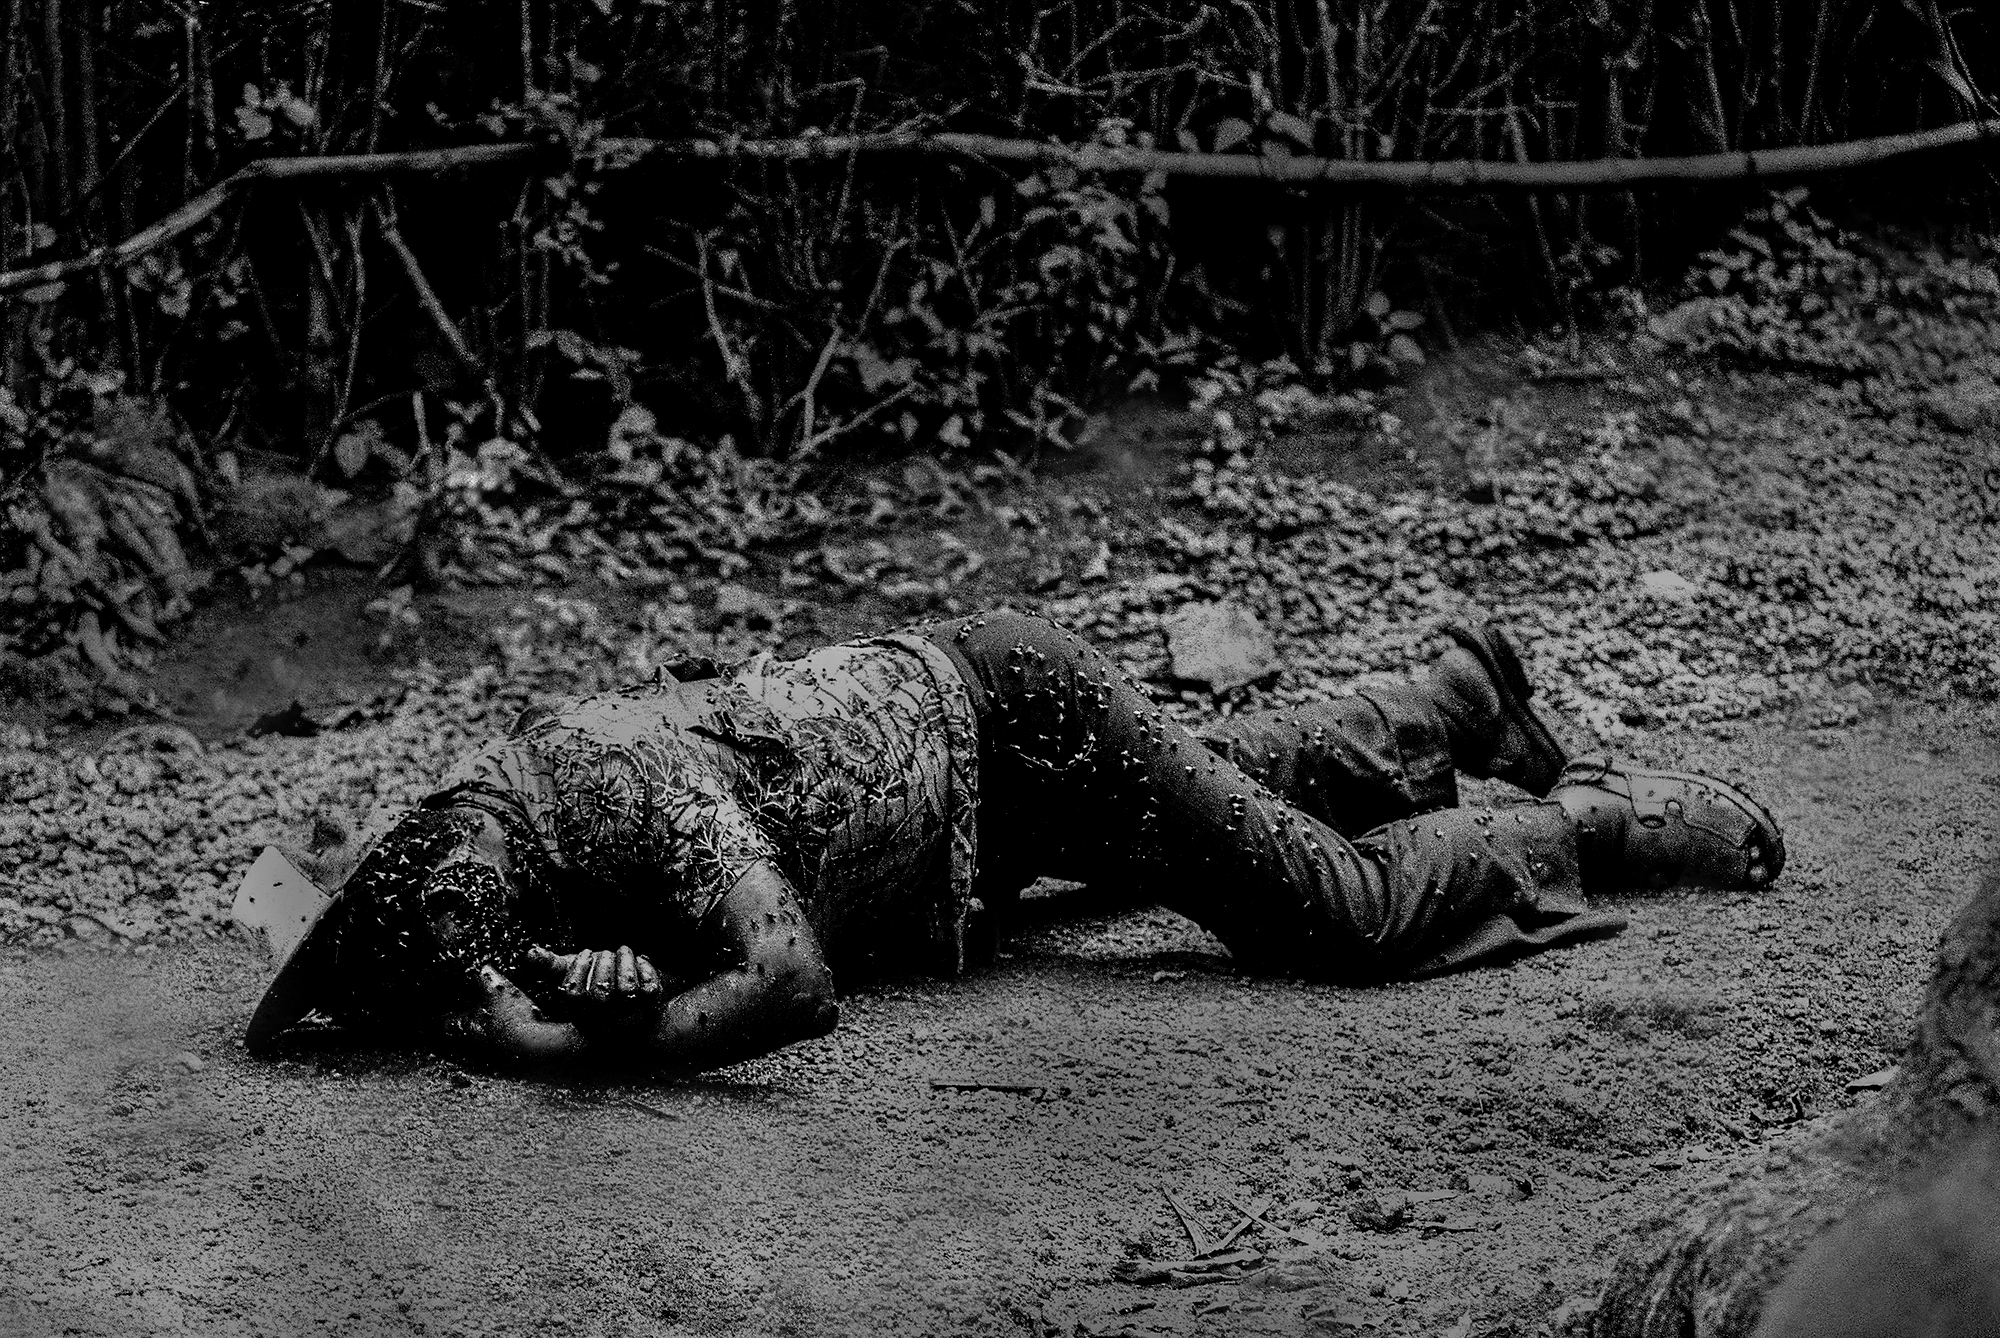  A Tutsi man felled in the front garden of his home. Many victims like this man appeared like still photographs - frozen in time -and peppered over the Rwandan landscape.  